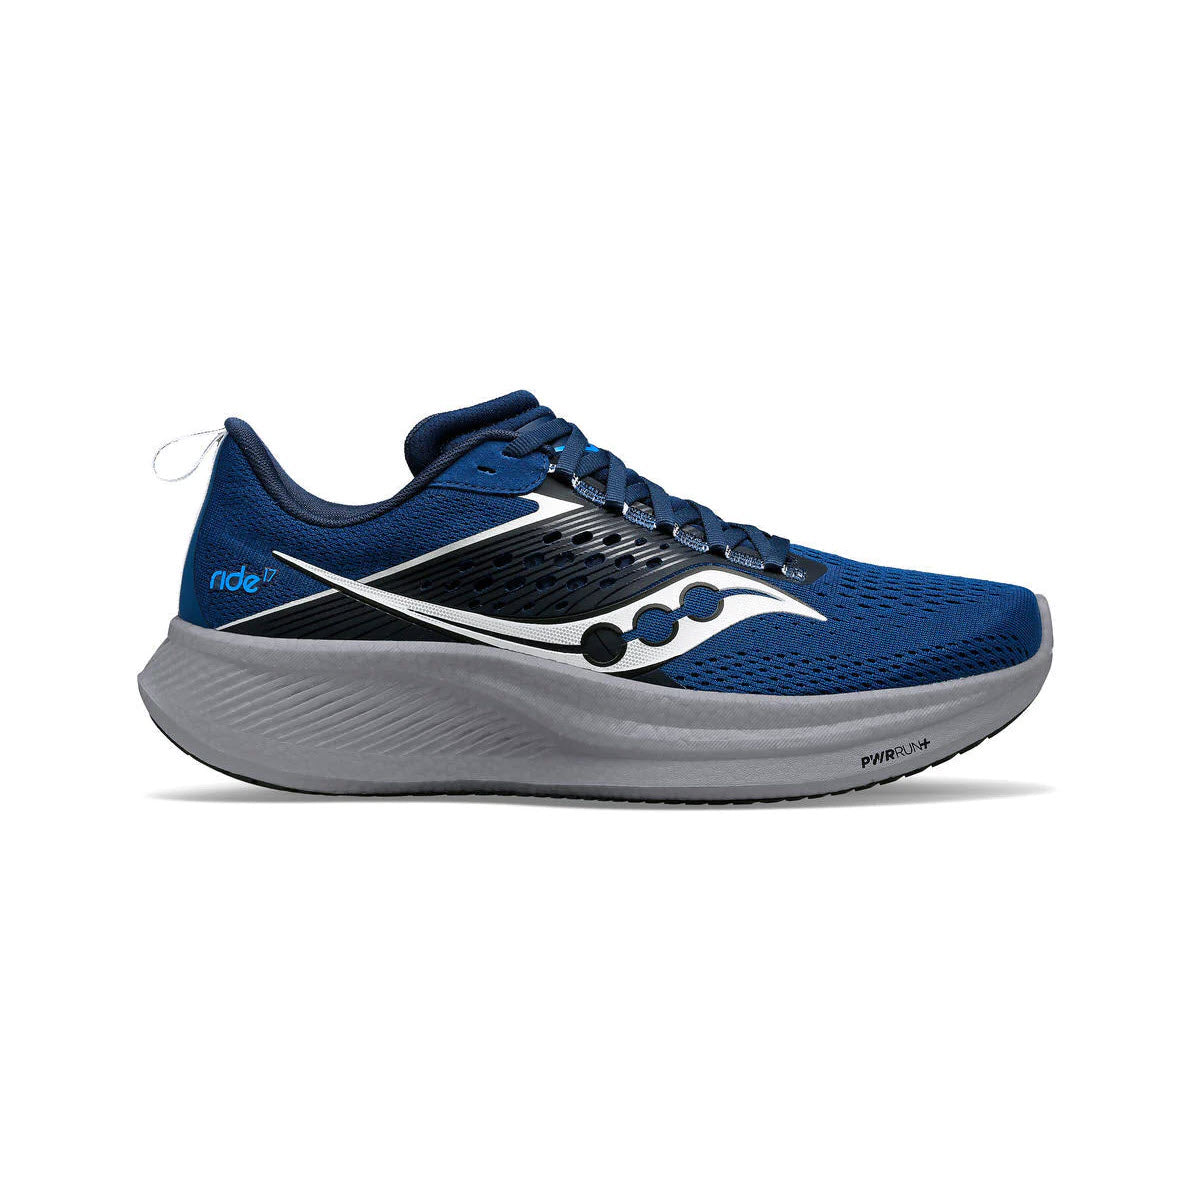 Blue Saucony Ride 17 Tide/Silver running shoe with white midsole and distinctive logo on the side, positioned against a white background.